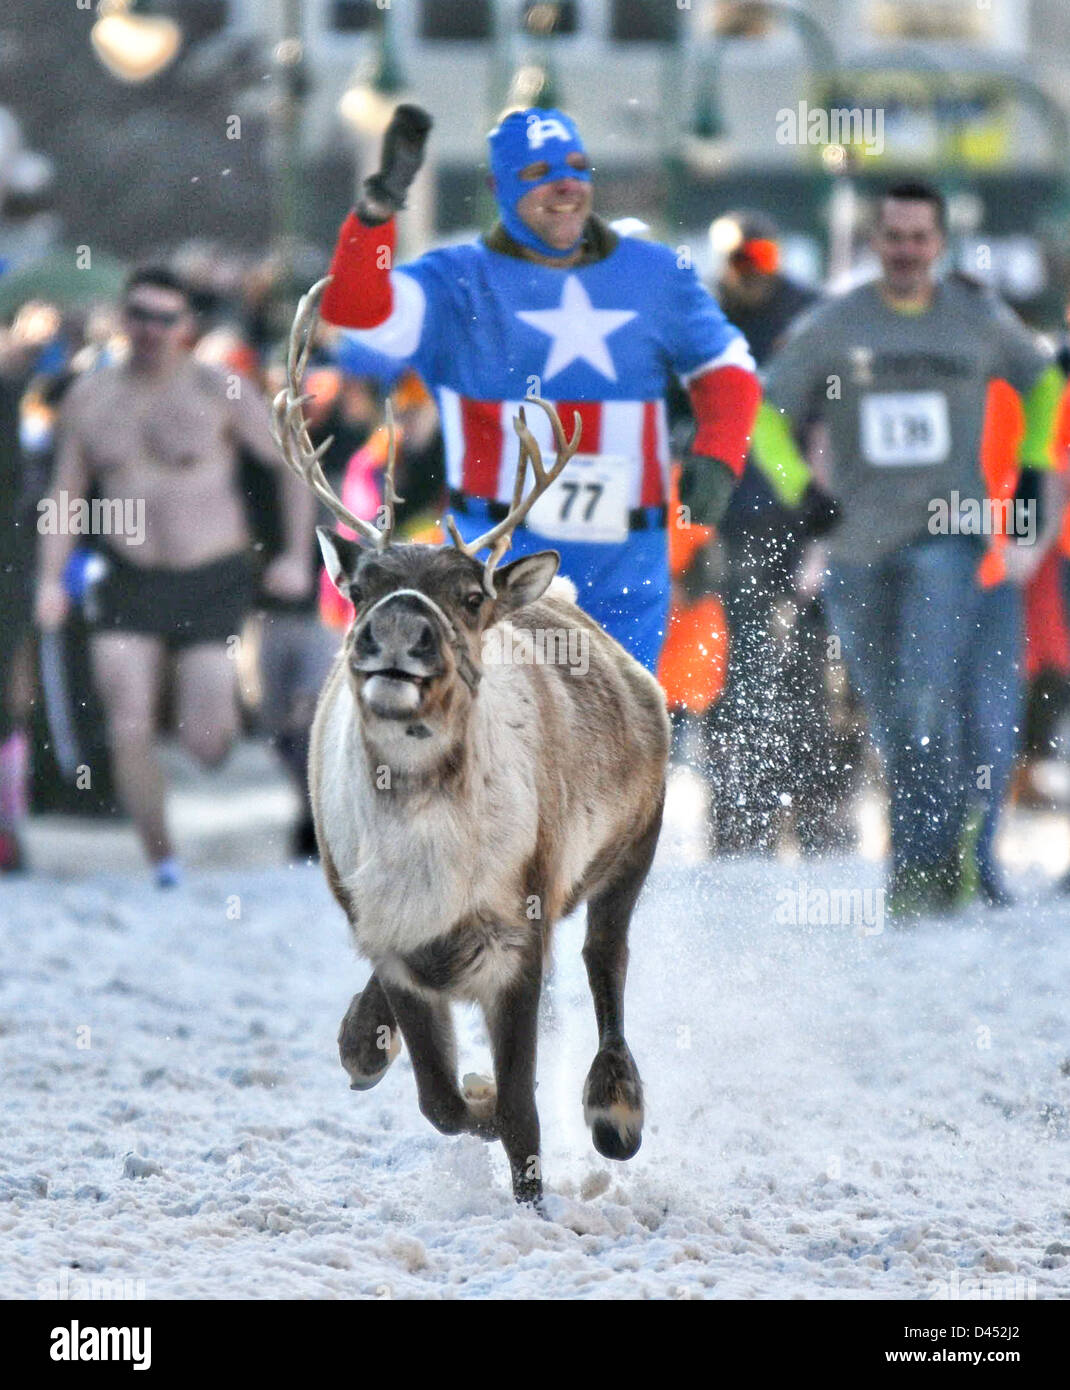 A man dressed as Captain America participates in the Running of the Reindeer during the Fur Rondy Festival March 2, 2013 in Anchorage, Alaska. The festival is the Alaskan version of Pamplona, Spain's 'Running of the Bulls by running throughout the snowy streets of Anchorage dodging and ducking the hoofed animals. Stock Photo